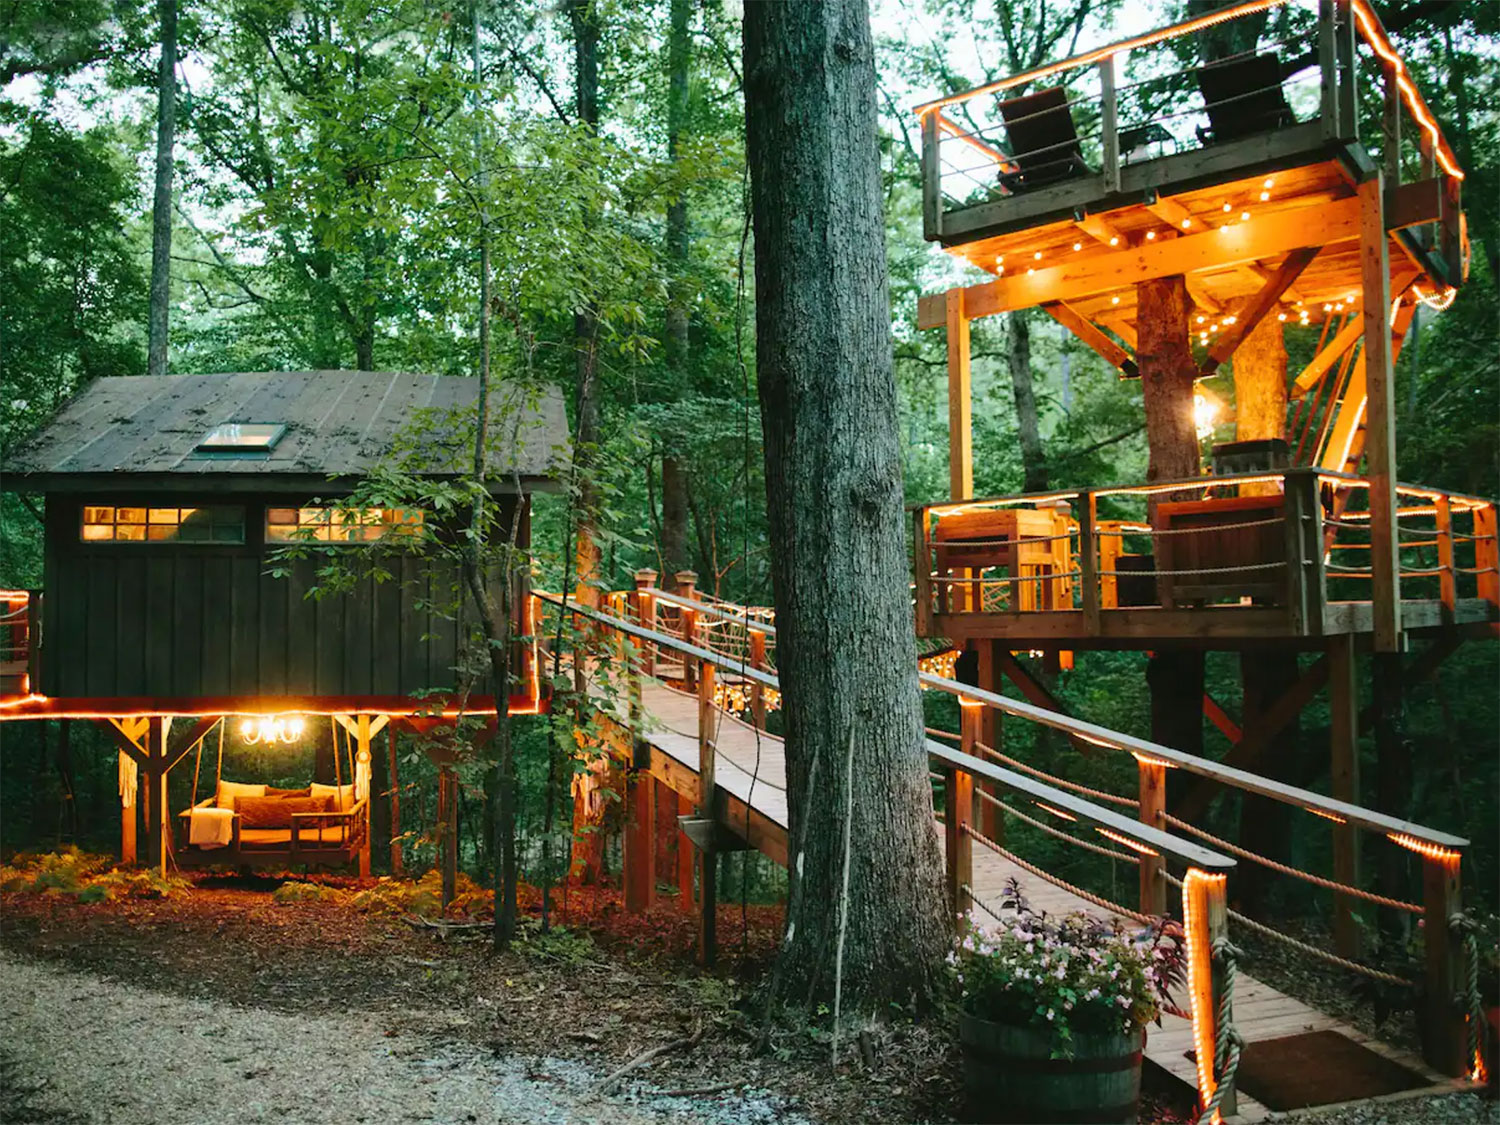 An AIRBNB Farm Treehouse getaway in the woods.